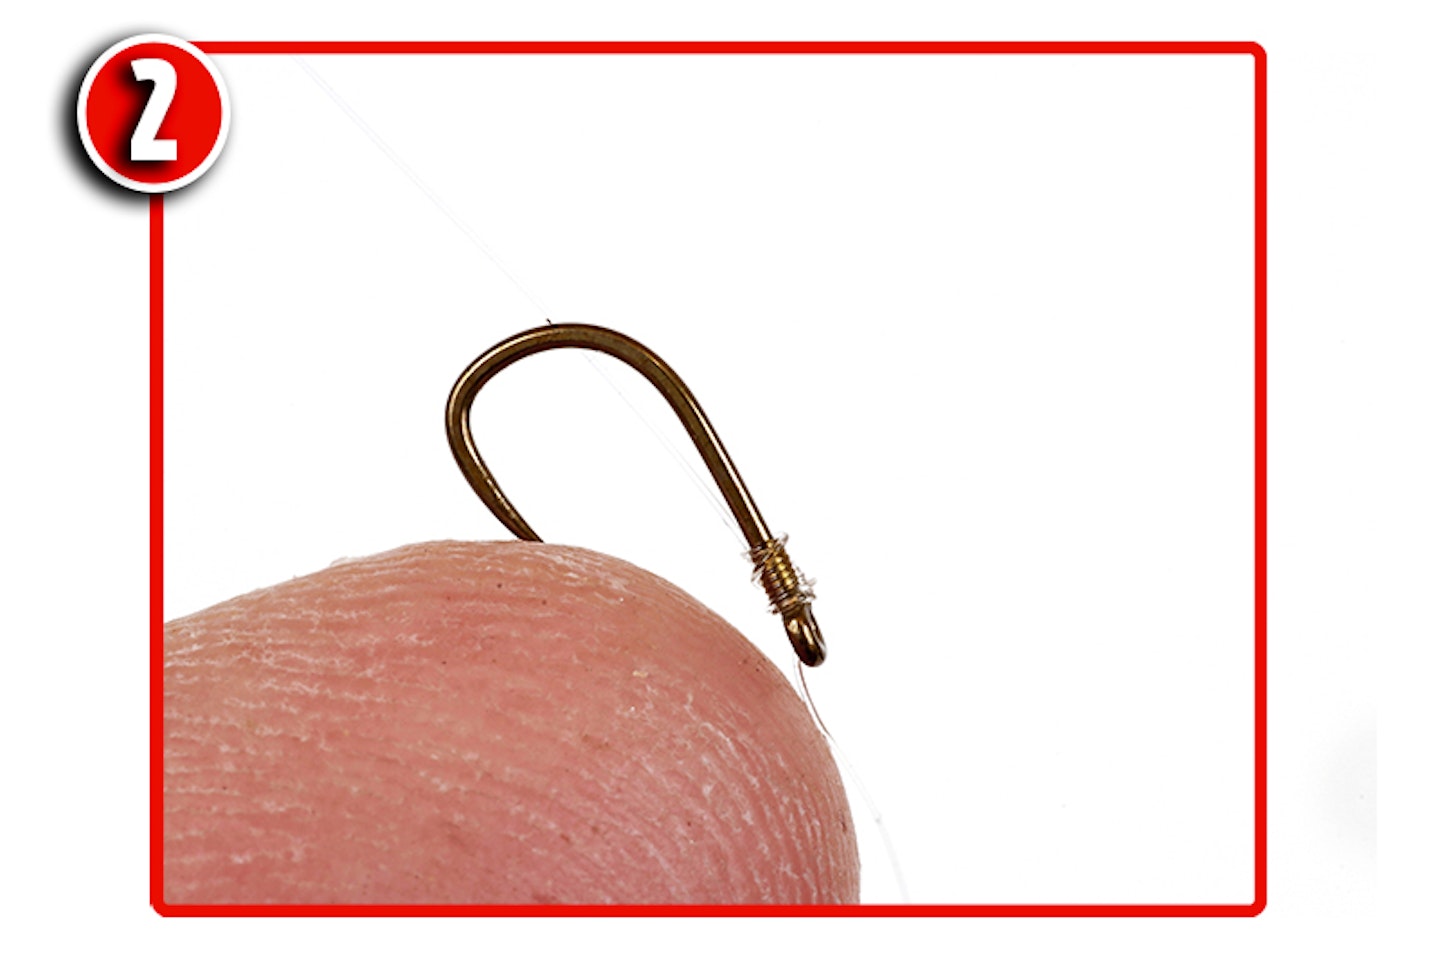 Tie on the eyed hook using a through-the-eye whipping knot with 12 turns, for a great angle